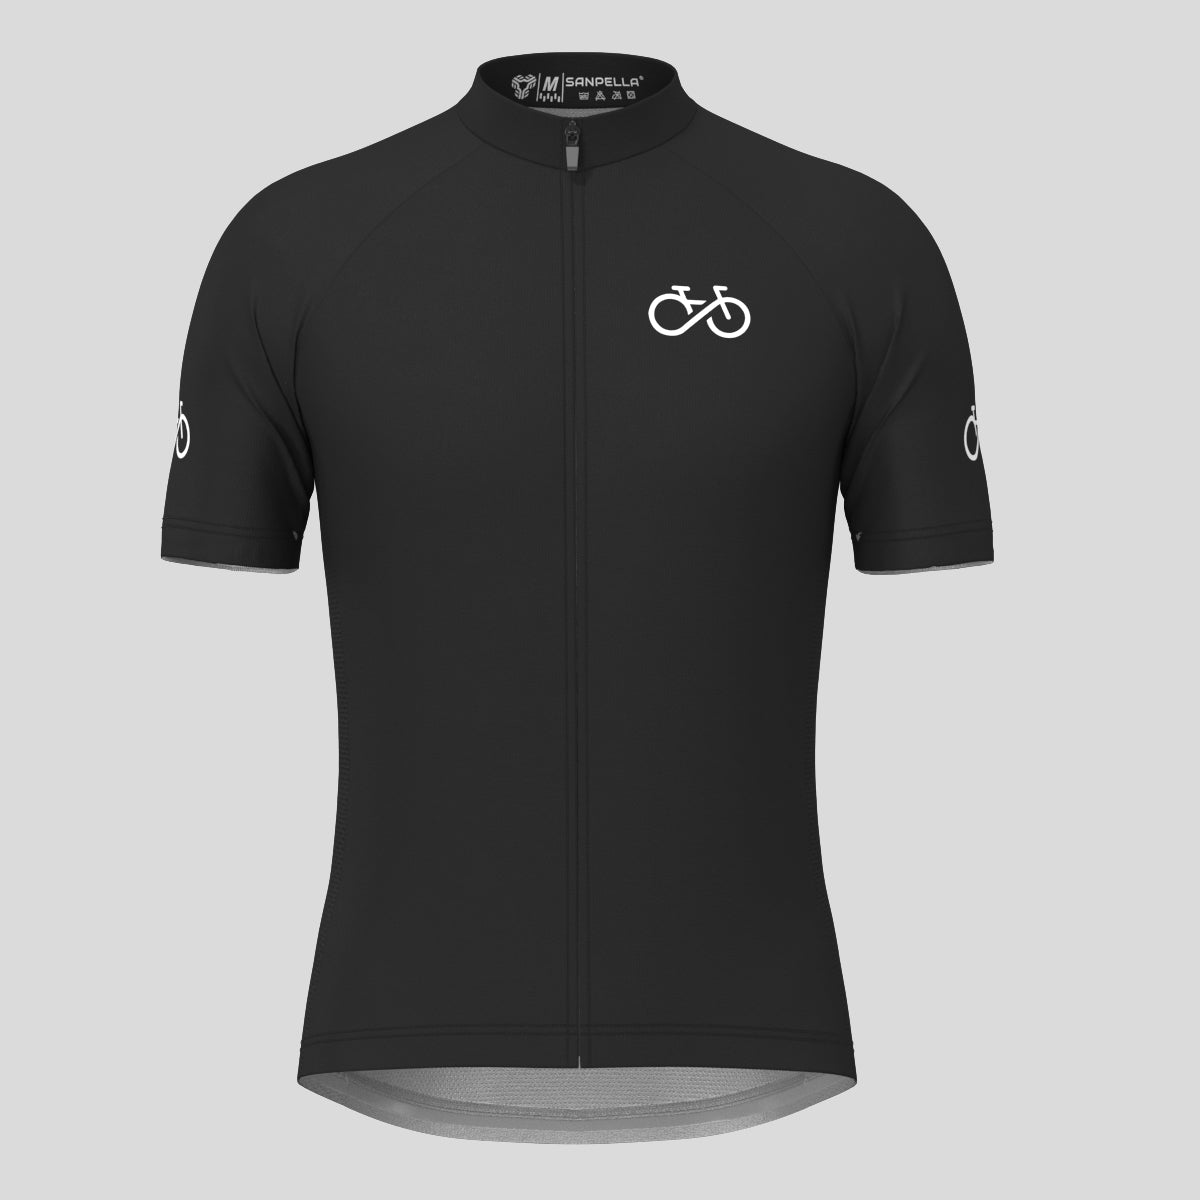 Ride Forever Men's Cycling Jersey -Black